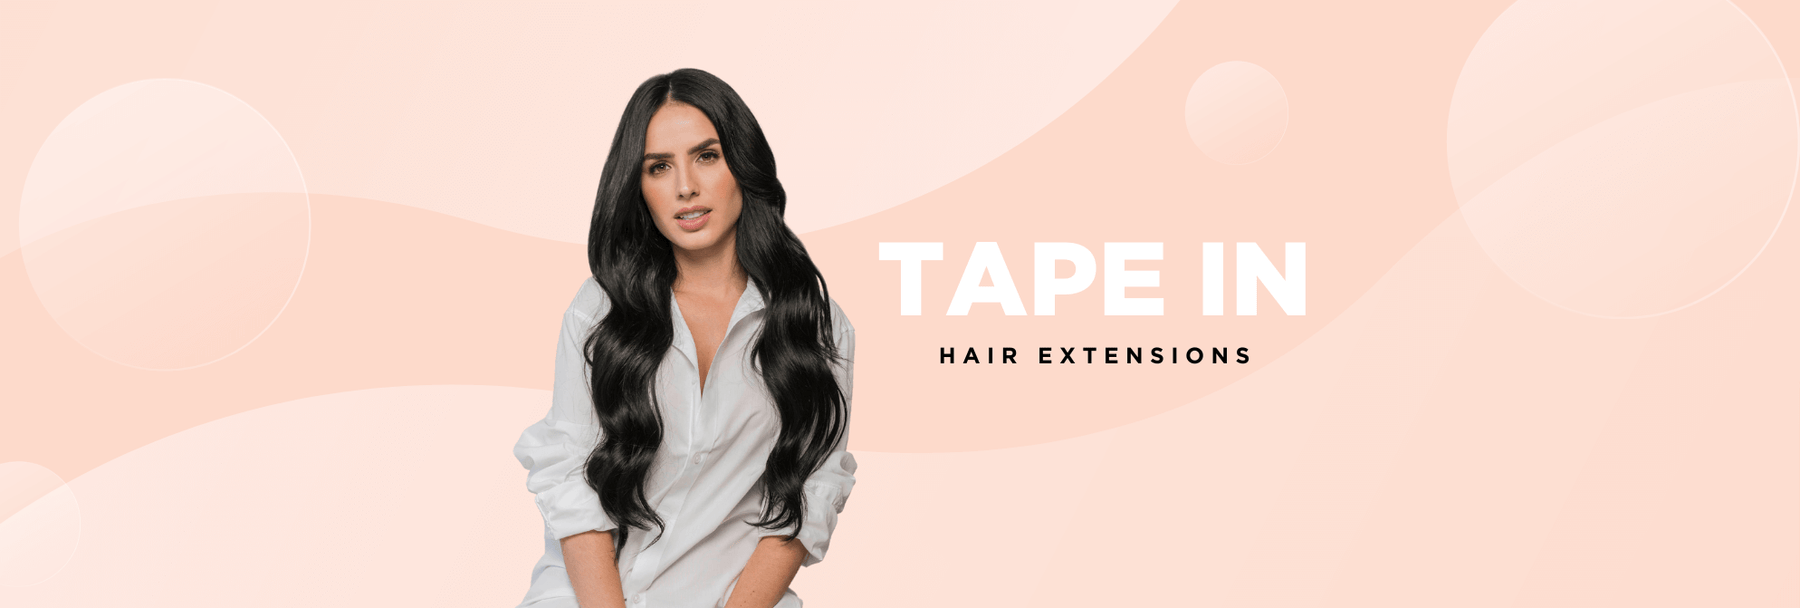 Aqua Tape-In Hair Extensions for Professionals Only